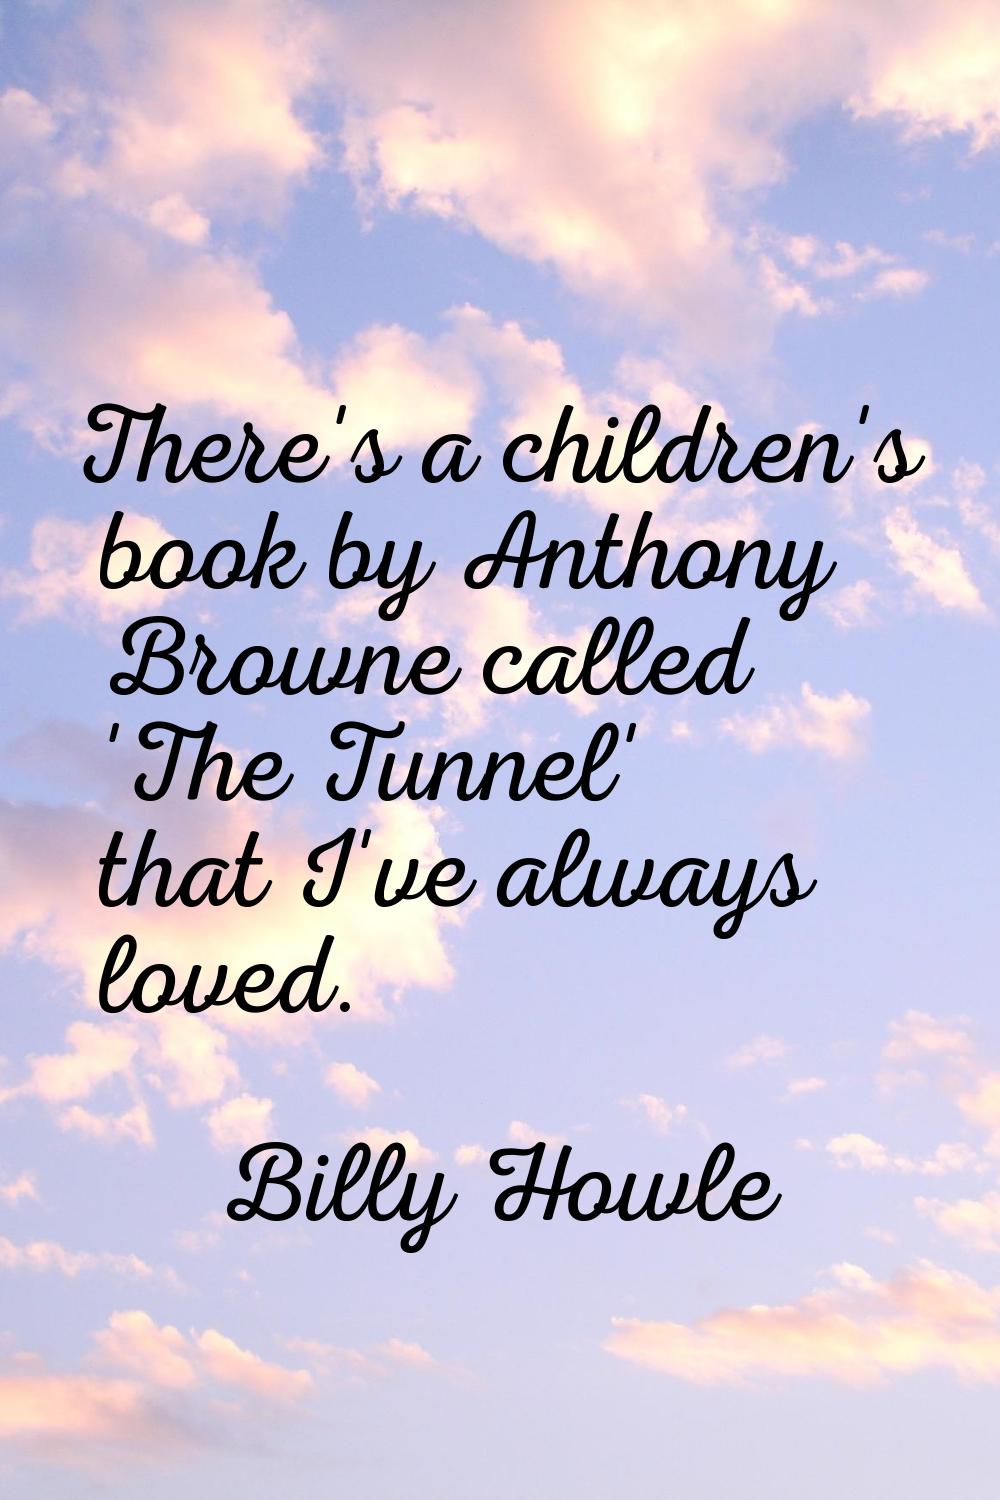 There's a children's book by Anthony Browne called 'The Tunnel' that I've always loved.